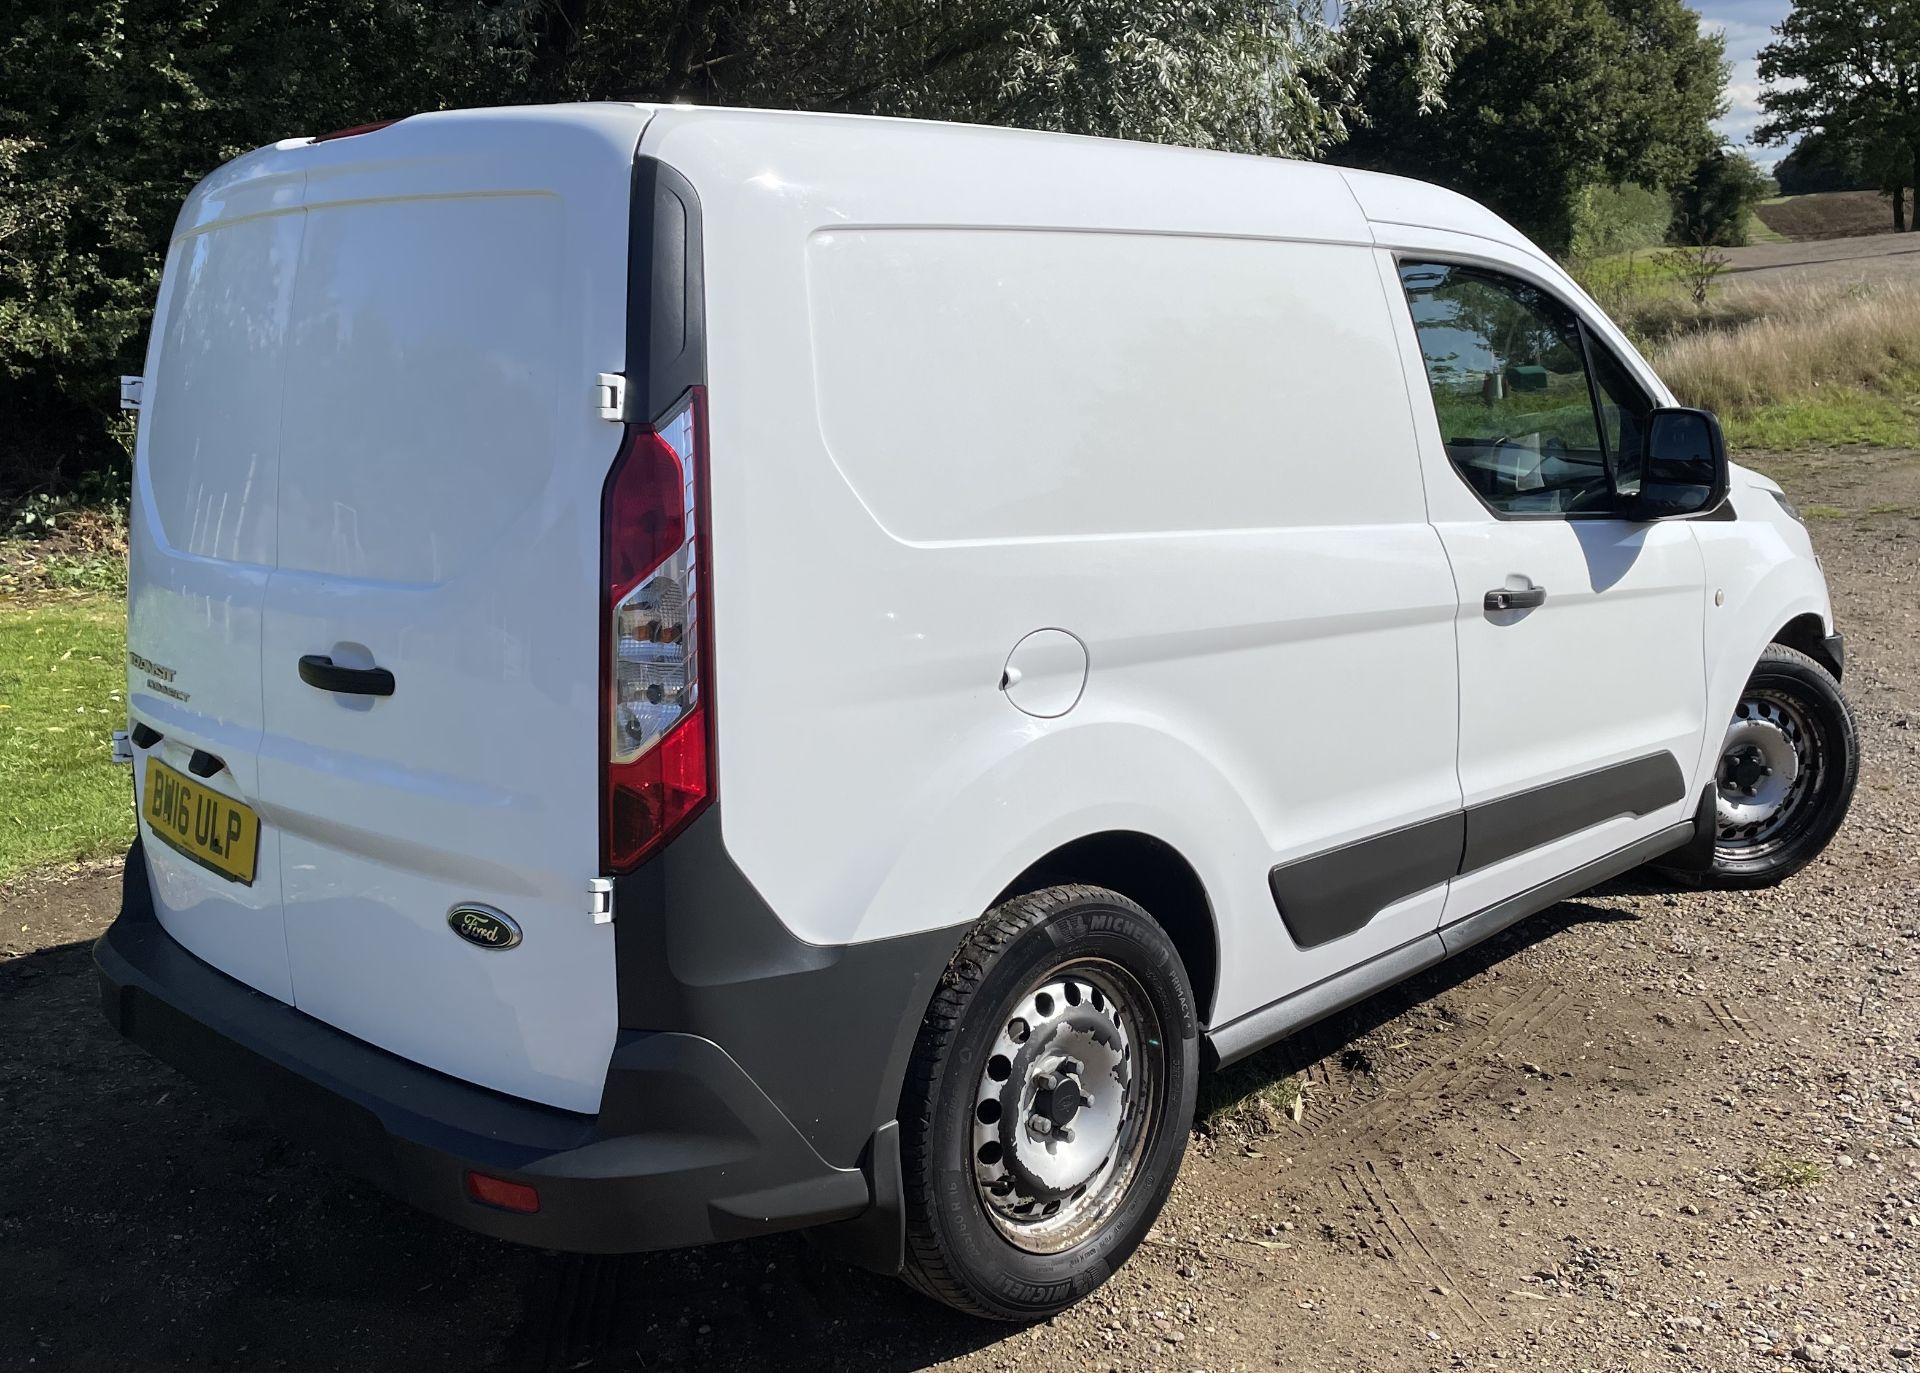 Ford PU2 Transit Connect 200, 1.6 TDCi 75ps Panel Van (Euro 5), Registration BW16 ULP, First - Image 4 of 21